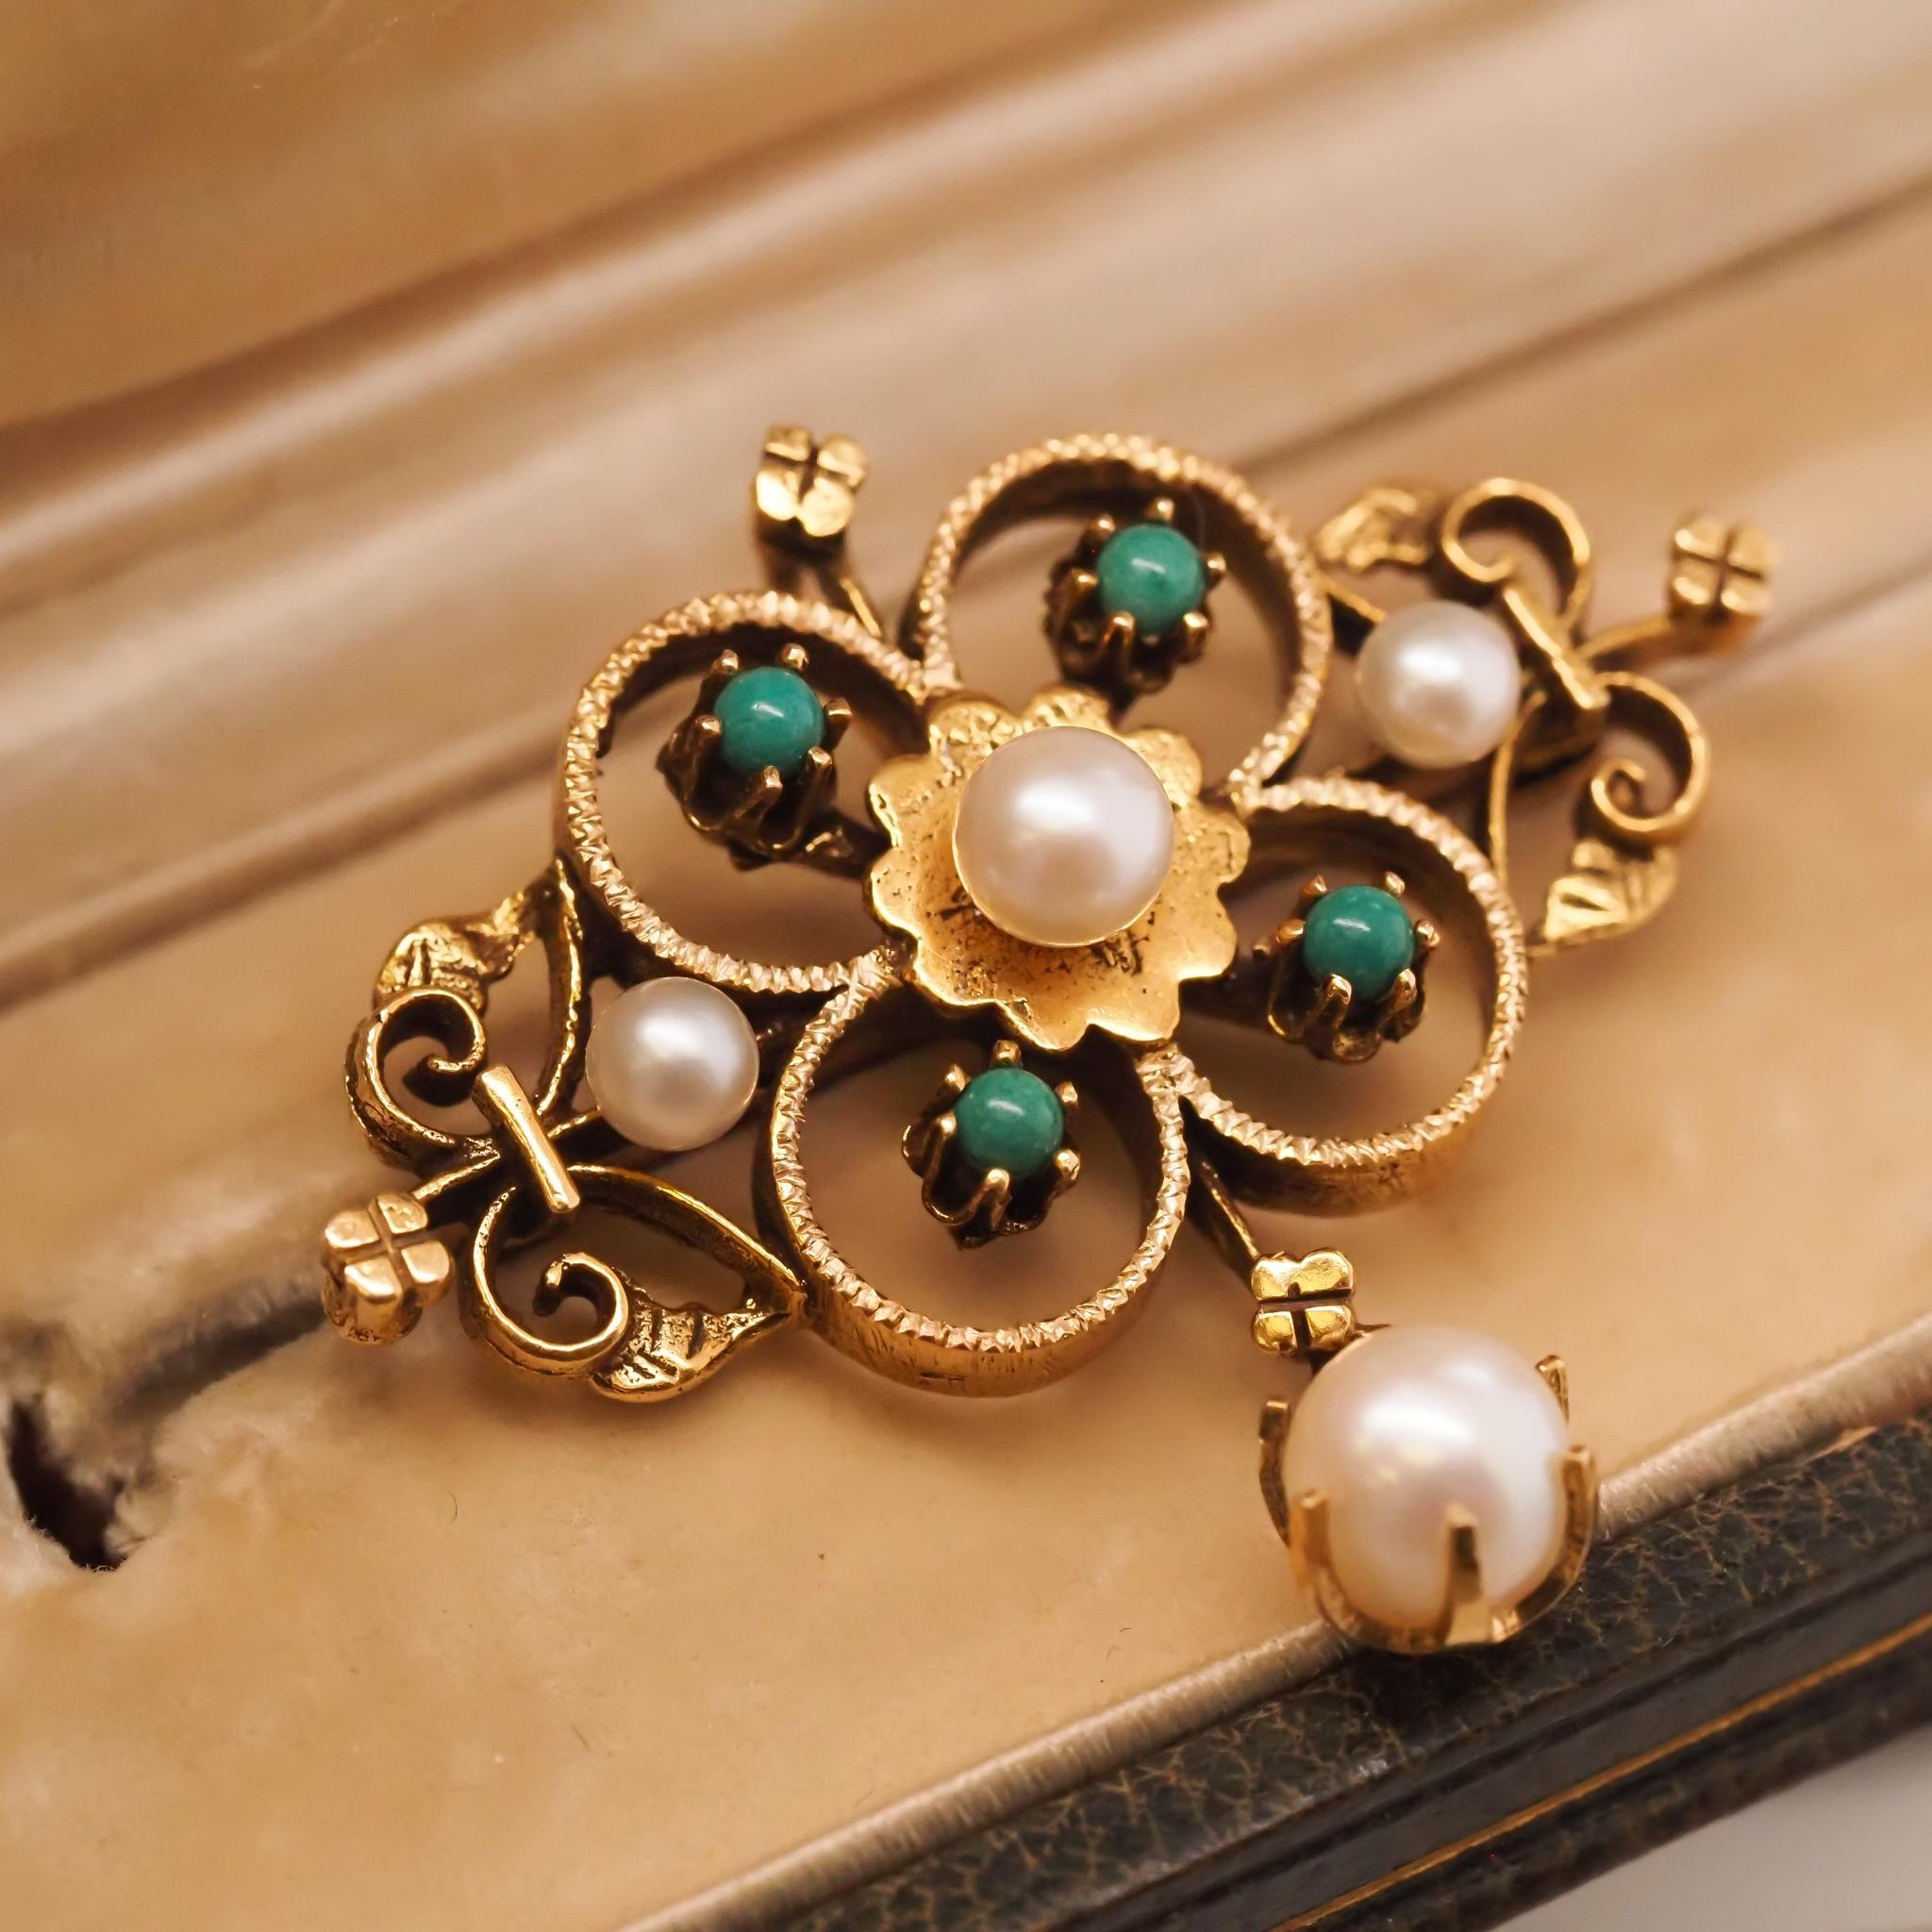 1950s 14K Yellow Gold Pearl and Turquoise Brooch and Pendant In Good Condition For Sale In Atlanta, GA